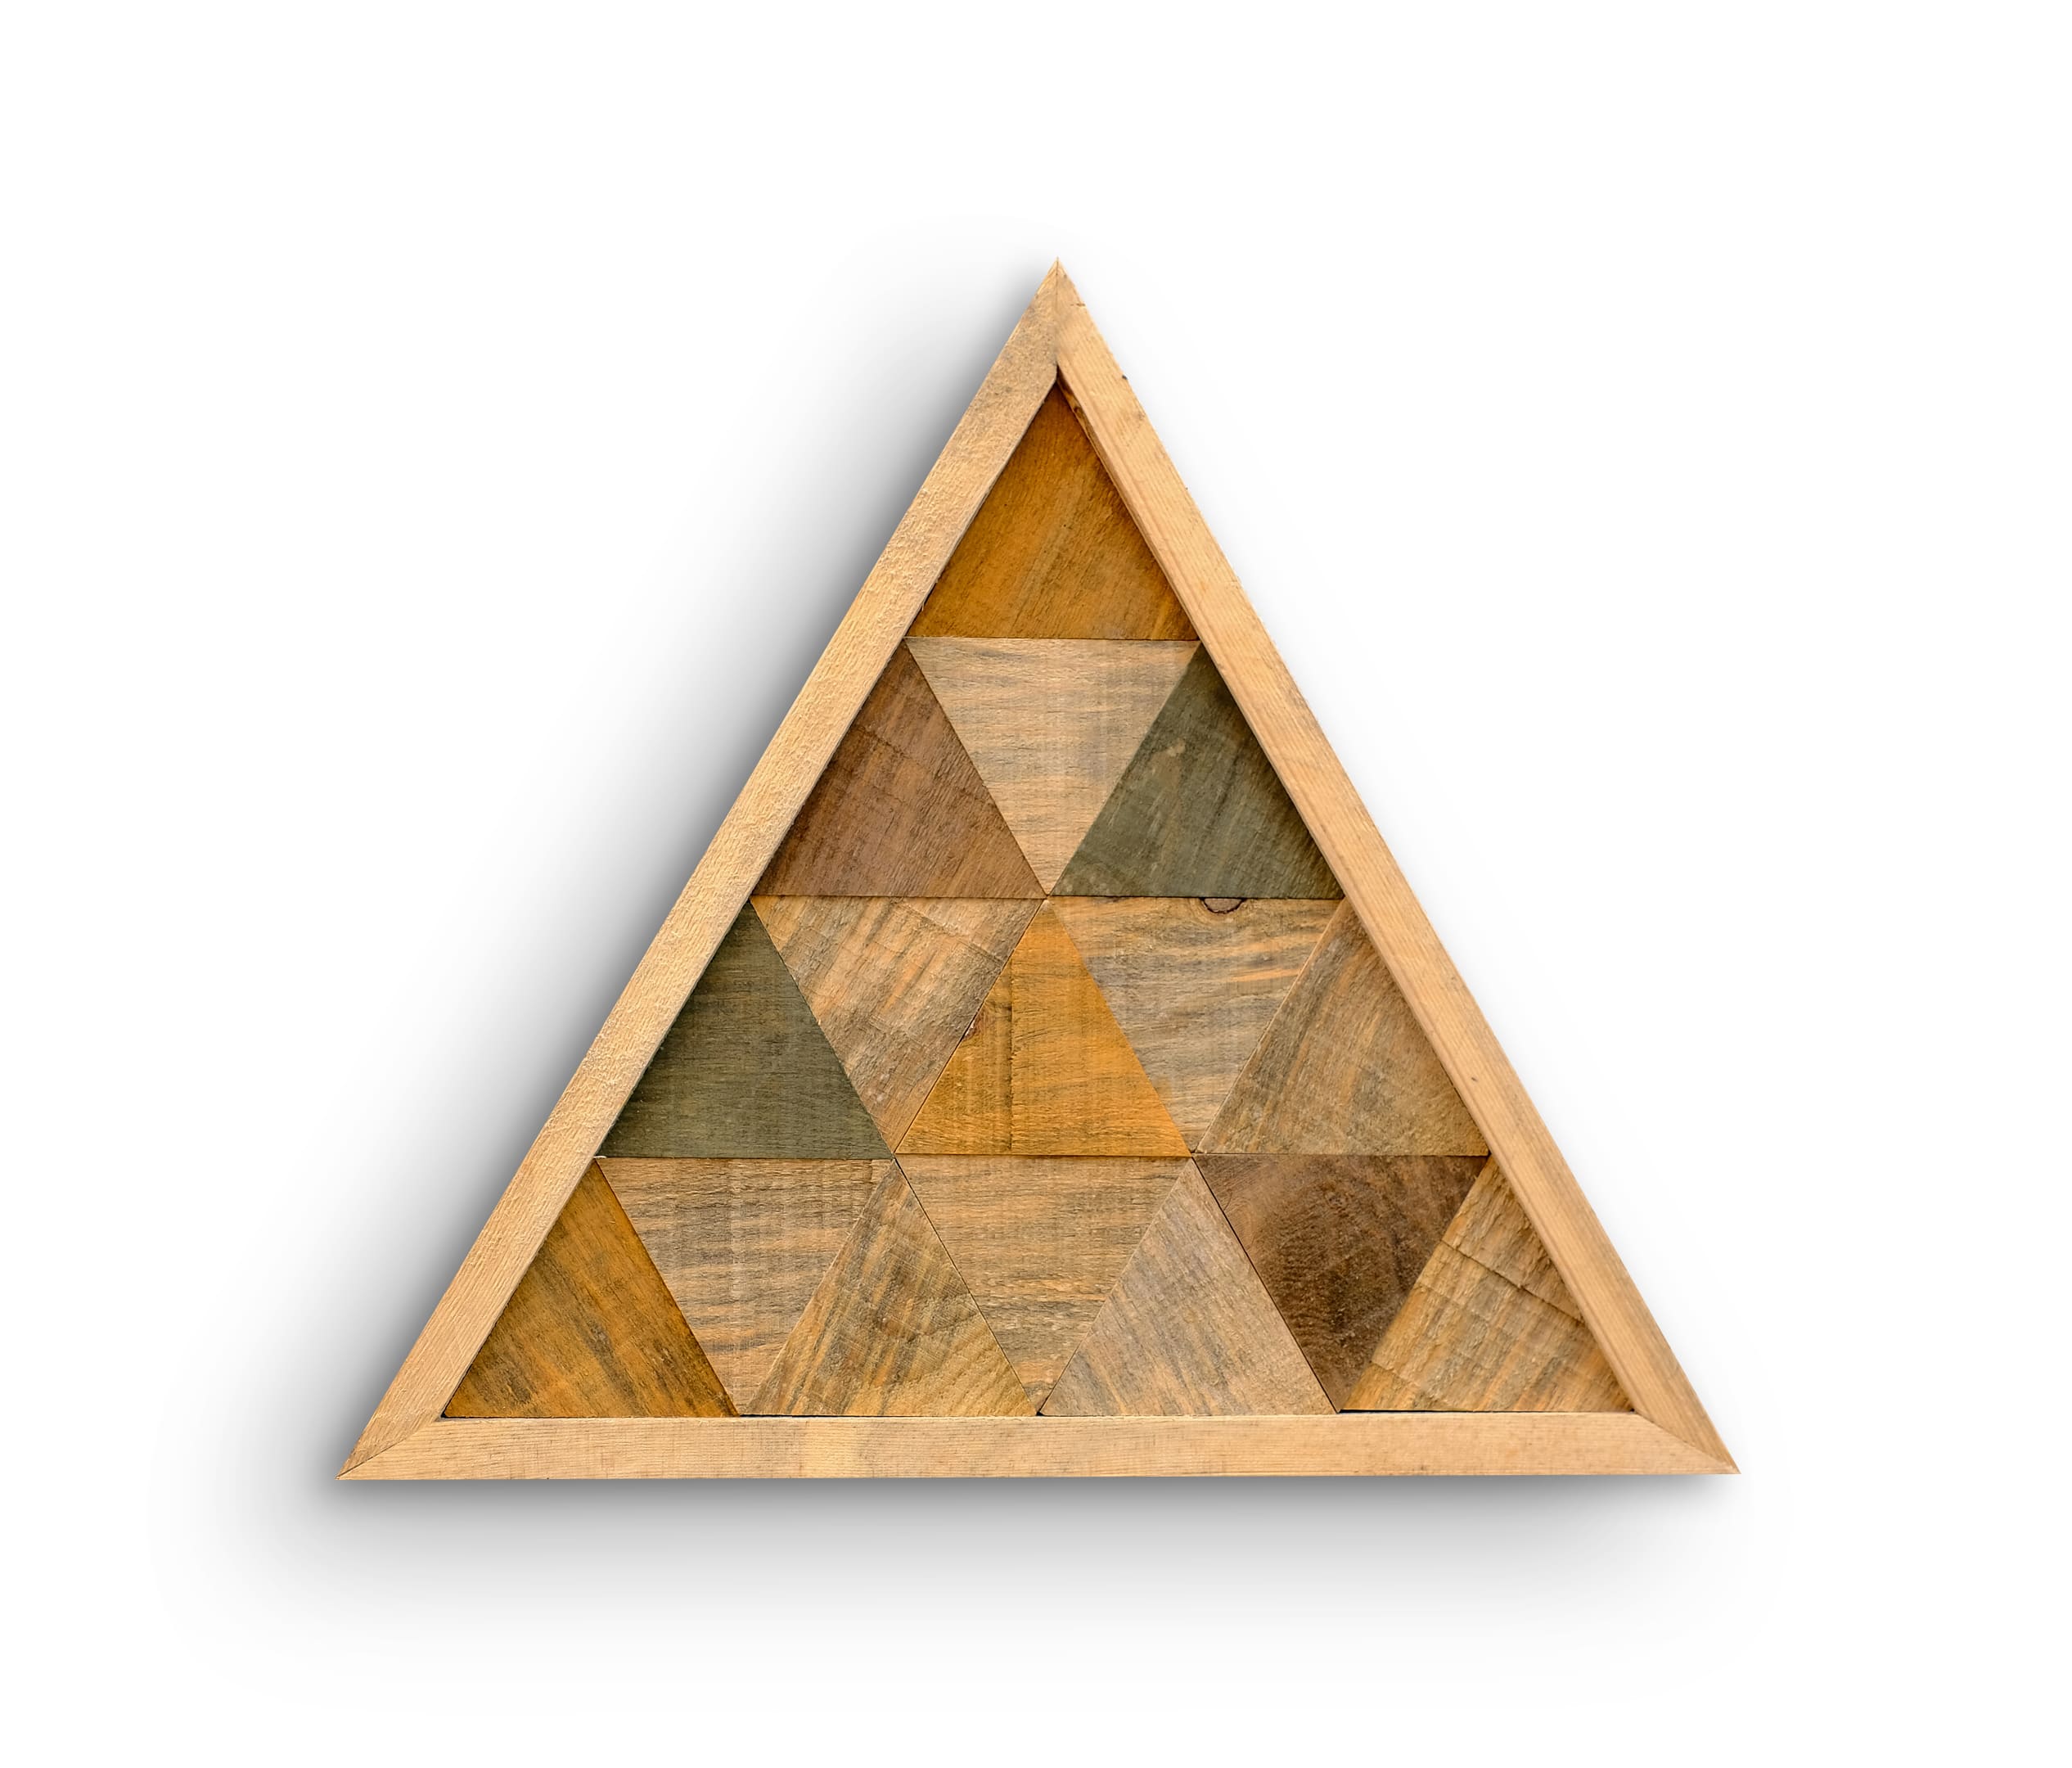 Rustic Triangle | Premium Wood Handmade Wall Sculpture - Limited Edition